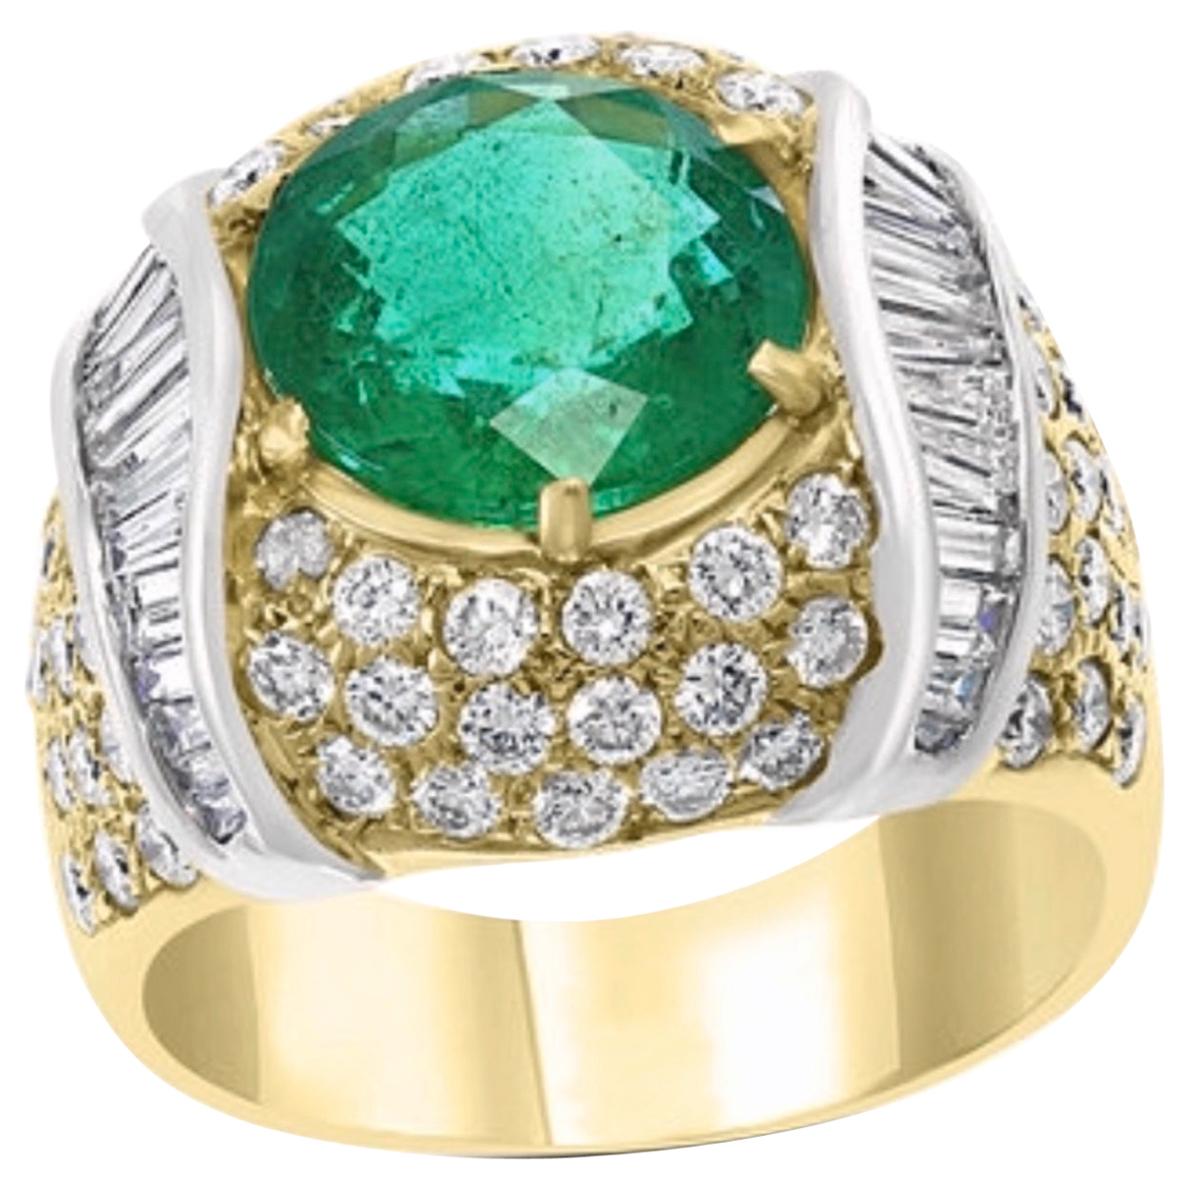 7 Carat Round Colombian Emerald and Diamond 18 Karat Gold Ring, Estate, Unisex For Sale